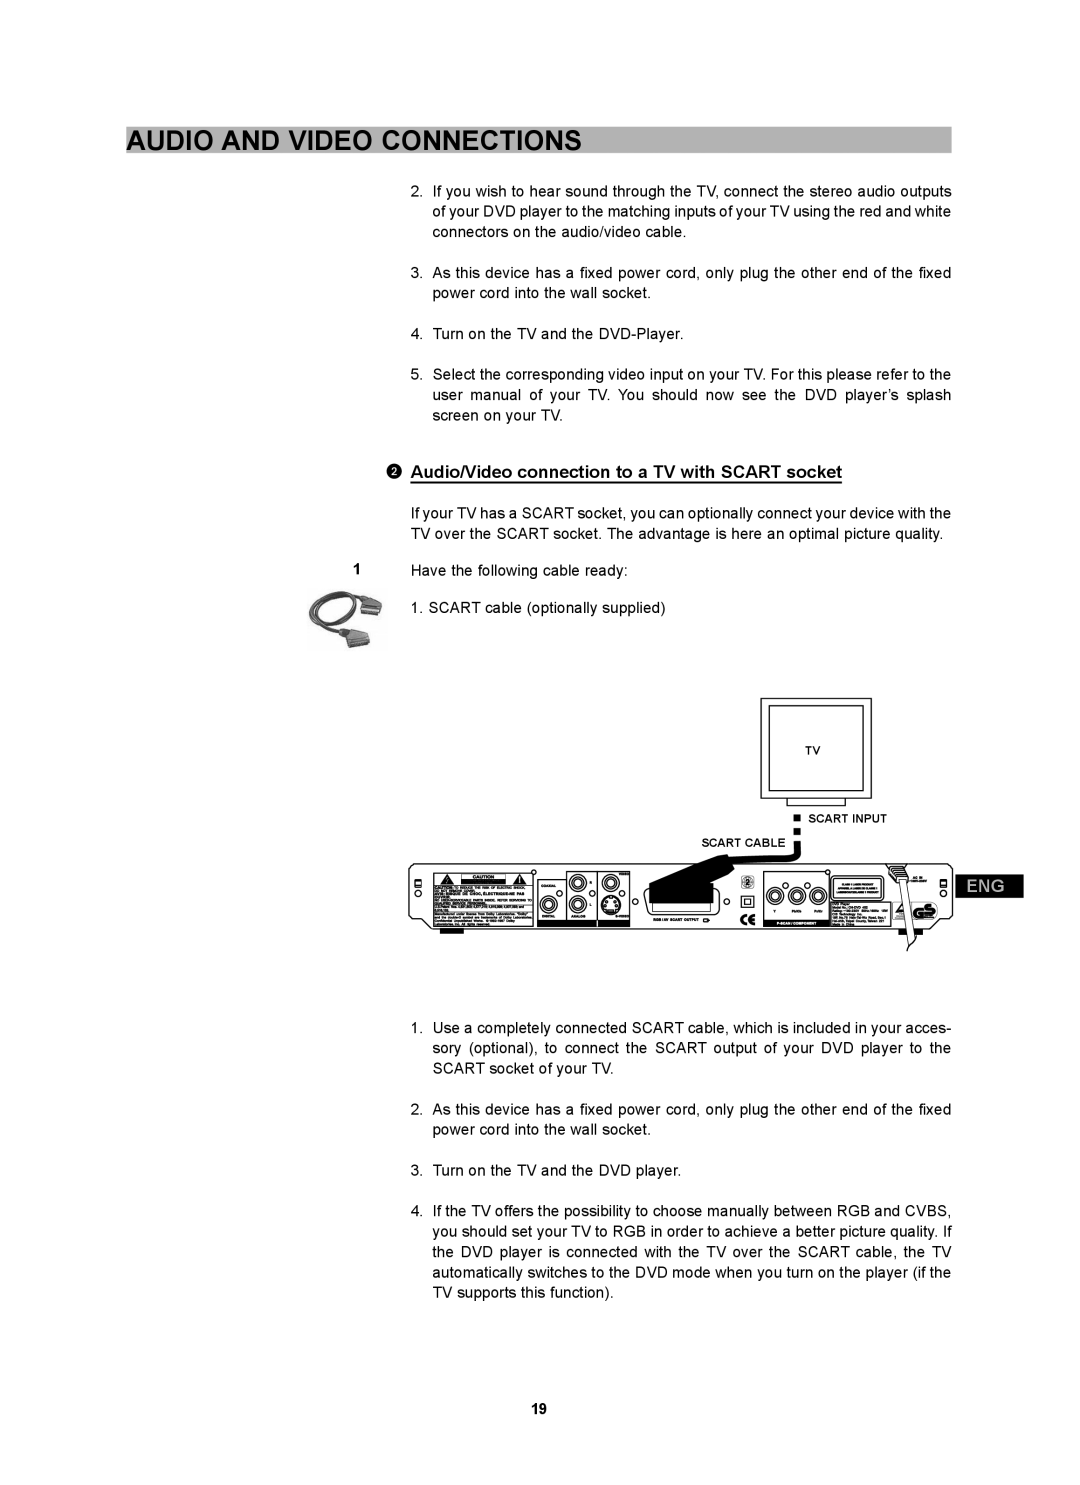 CyberHome Entertainment CH-DVD 452 manual Audio/Video connection to a TV with SCART socket, Audio And Video Connections 